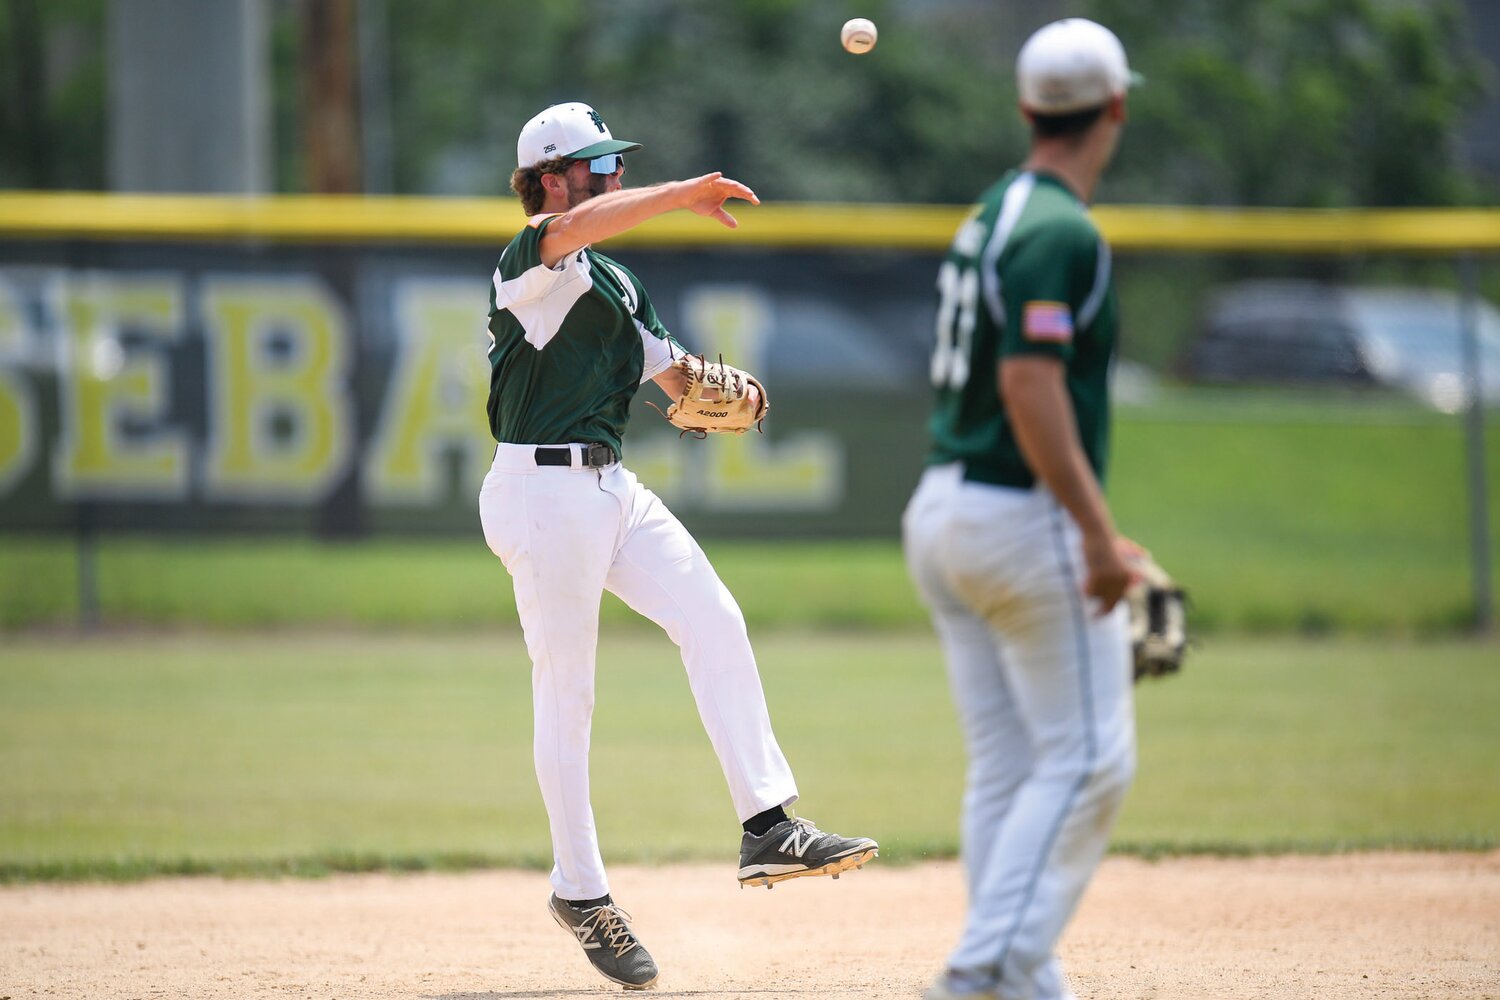 Pennridge’s Nate Lapp fields a grounder as Ryan Hass, third baseman, watches during the first inning of Sunday’s Game 1 doubleheader.